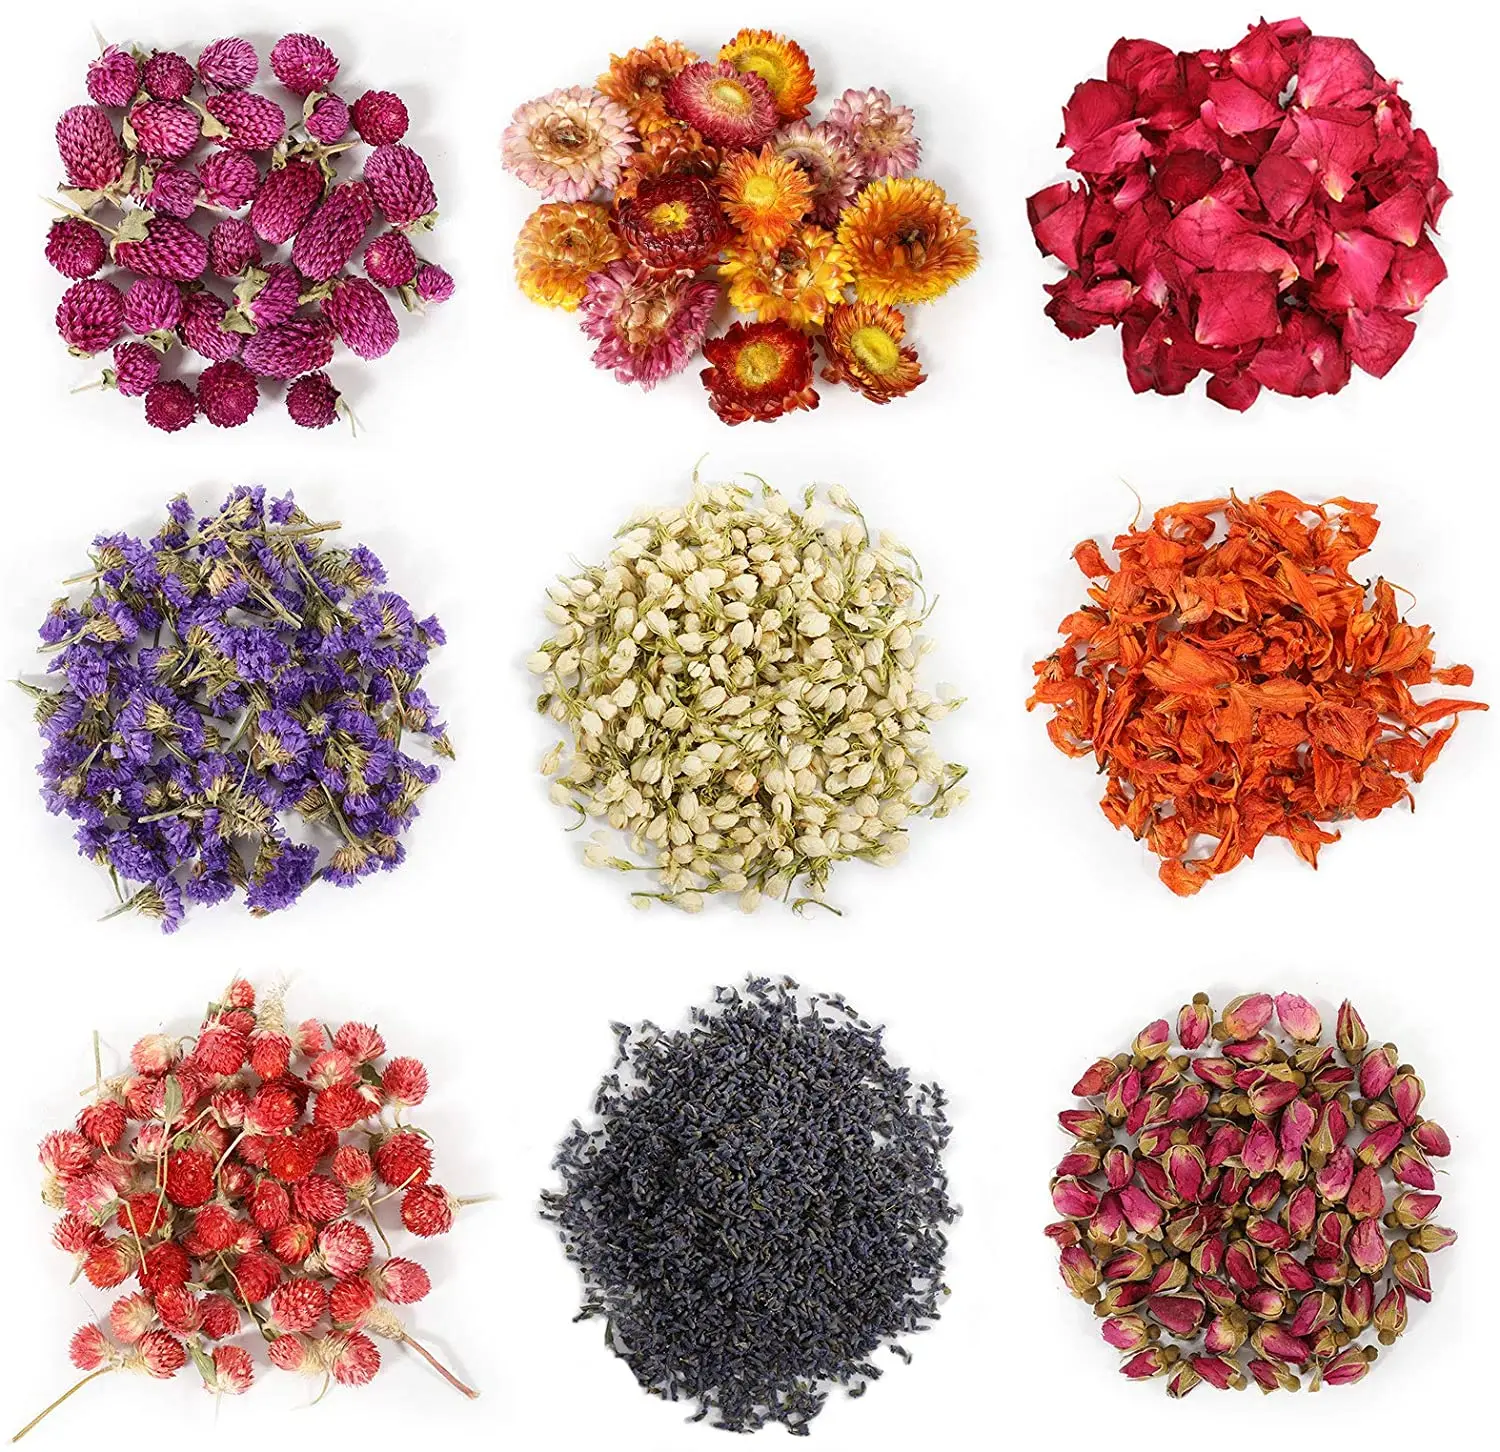 9 Bags Natural Dried Flowers ,Rose, Lavender, Jasmine Herbs Kit DIY Soap,Candle, Bath,Resin Jewelry Making,Home Wedding Decor